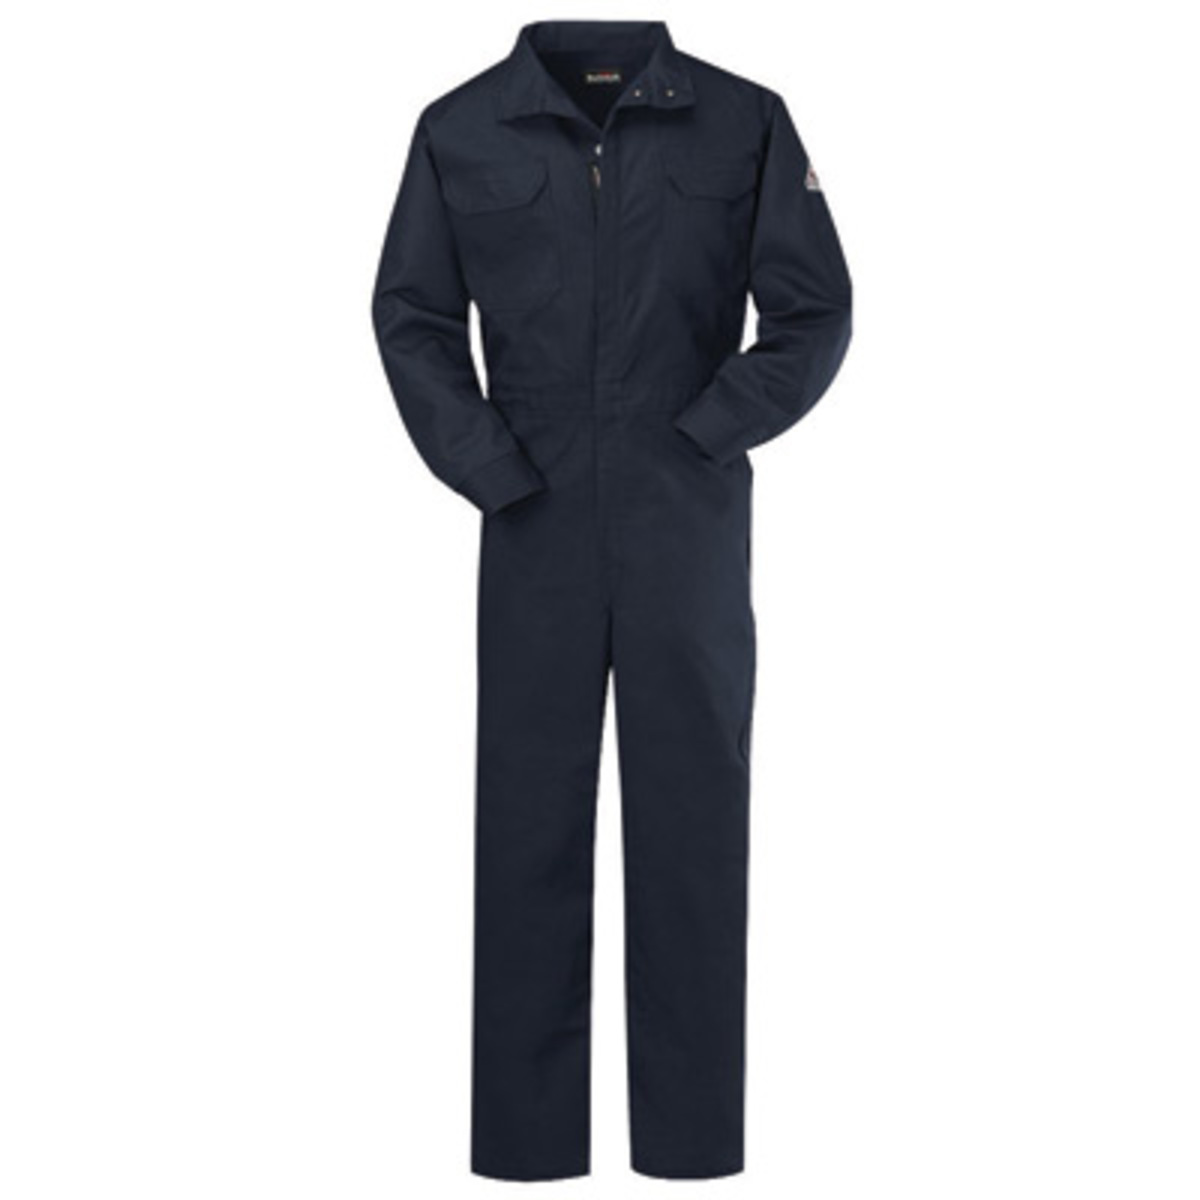 Bulwark® 62 Regular Navy Blue Westex Ultrasoft® Twill/Cotton/Nylon Flame Resistant Coveralls With Zipper Front Closure